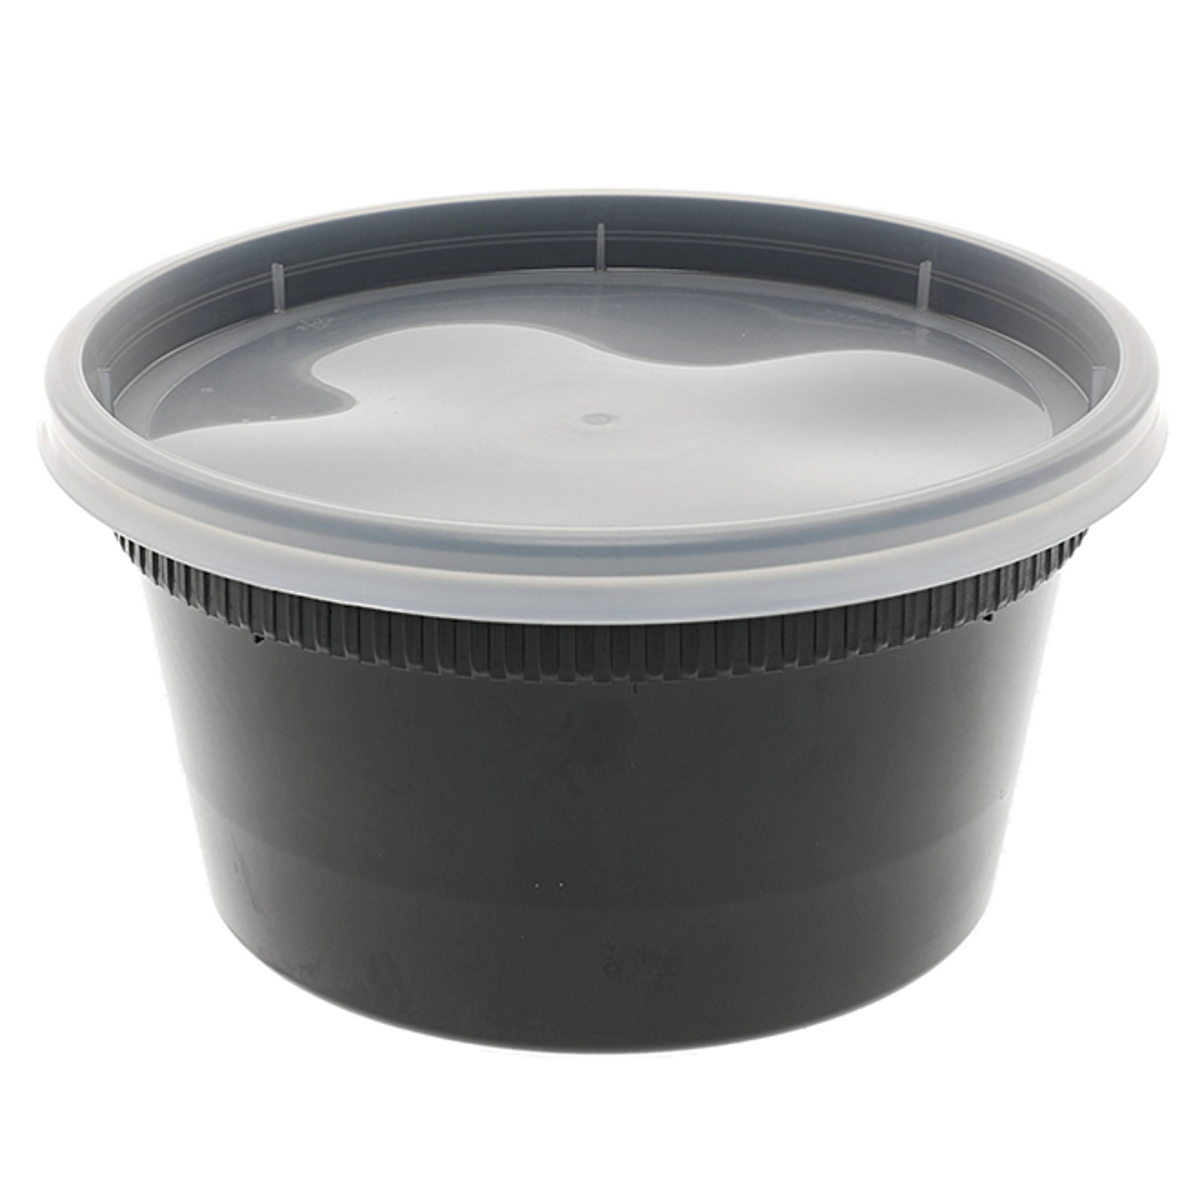 Pactiv YL2512 12 Oz. Plastic Deli Container with Lid - 240/Case